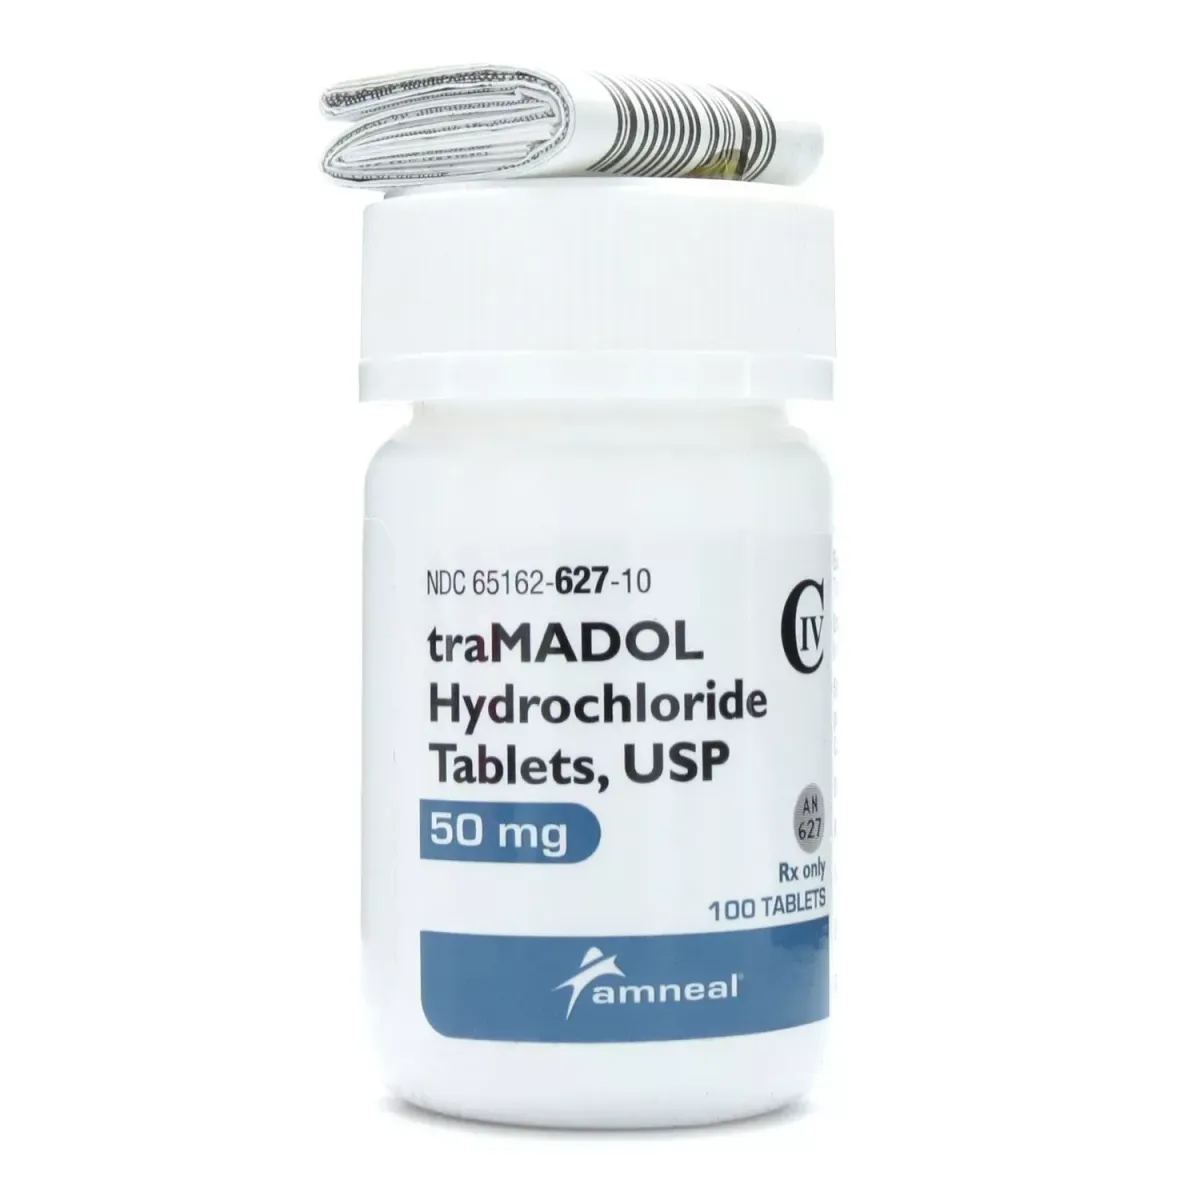 The UCI has Banned Tramadol